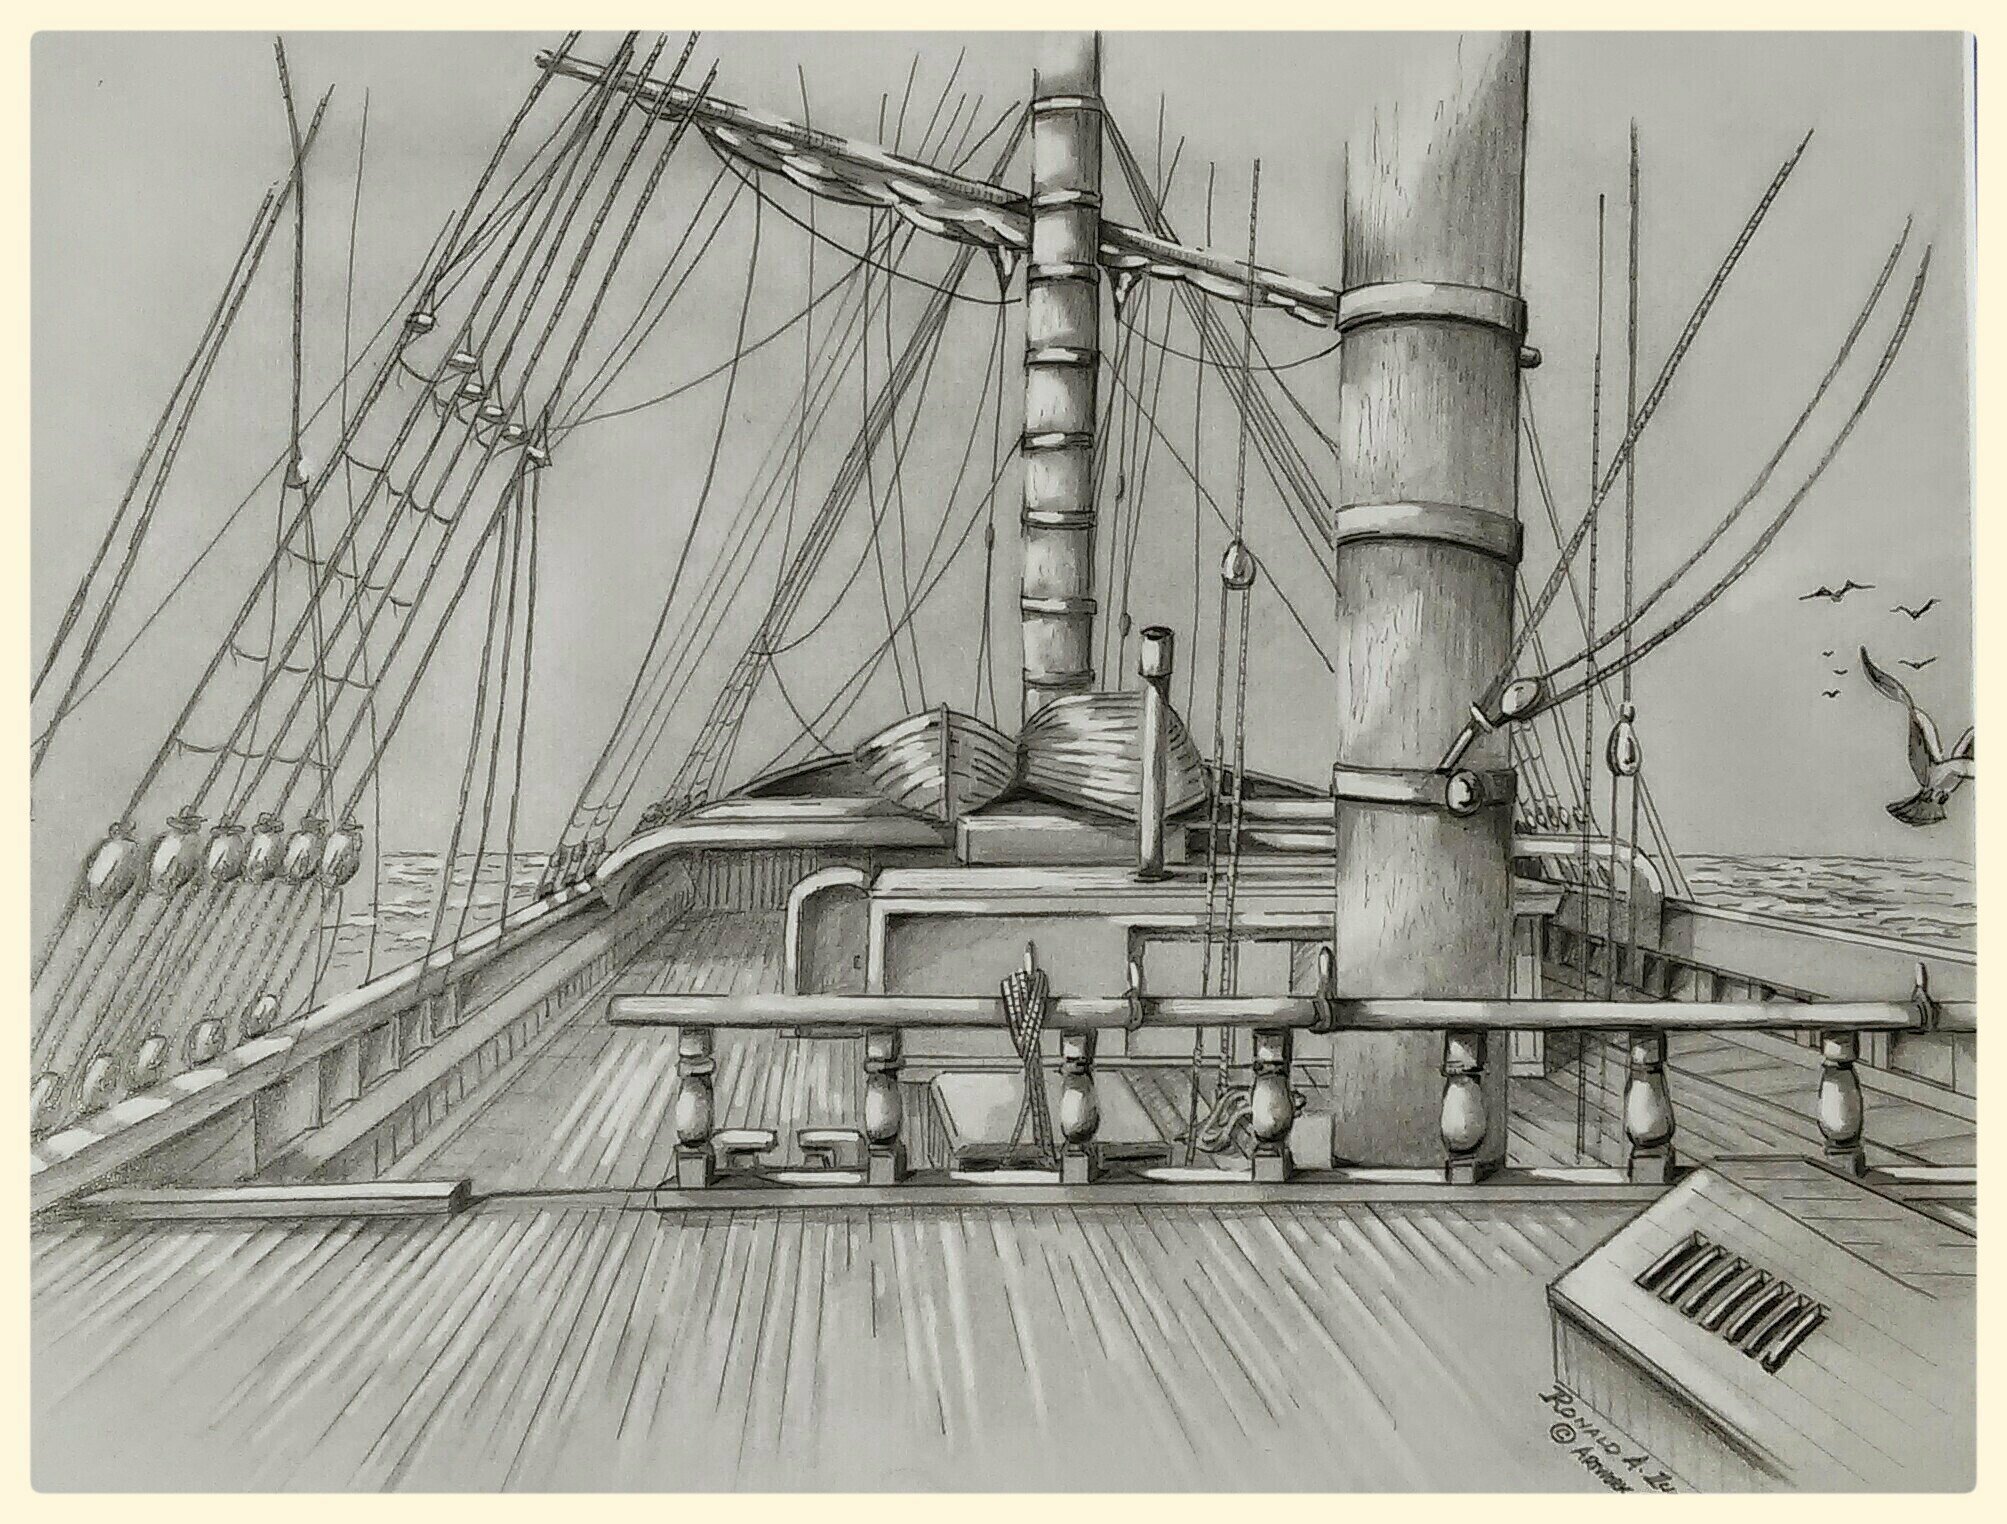 Ronald Lunn; Looking Aft, 2009, Original Drawing Pencil, 18 x 14 inches. Artwork description: 241 Pencil drawing of a ships deck, looking aft. 14 x 18 pencil on paper, framed under glass.  Signed by the artist. 100 hand drawn original artwork. i? 1/2 Copyright Artwork By Ronald Lunn This piece is for sale.  Please feel free to contact the artist directly regarding this or ...